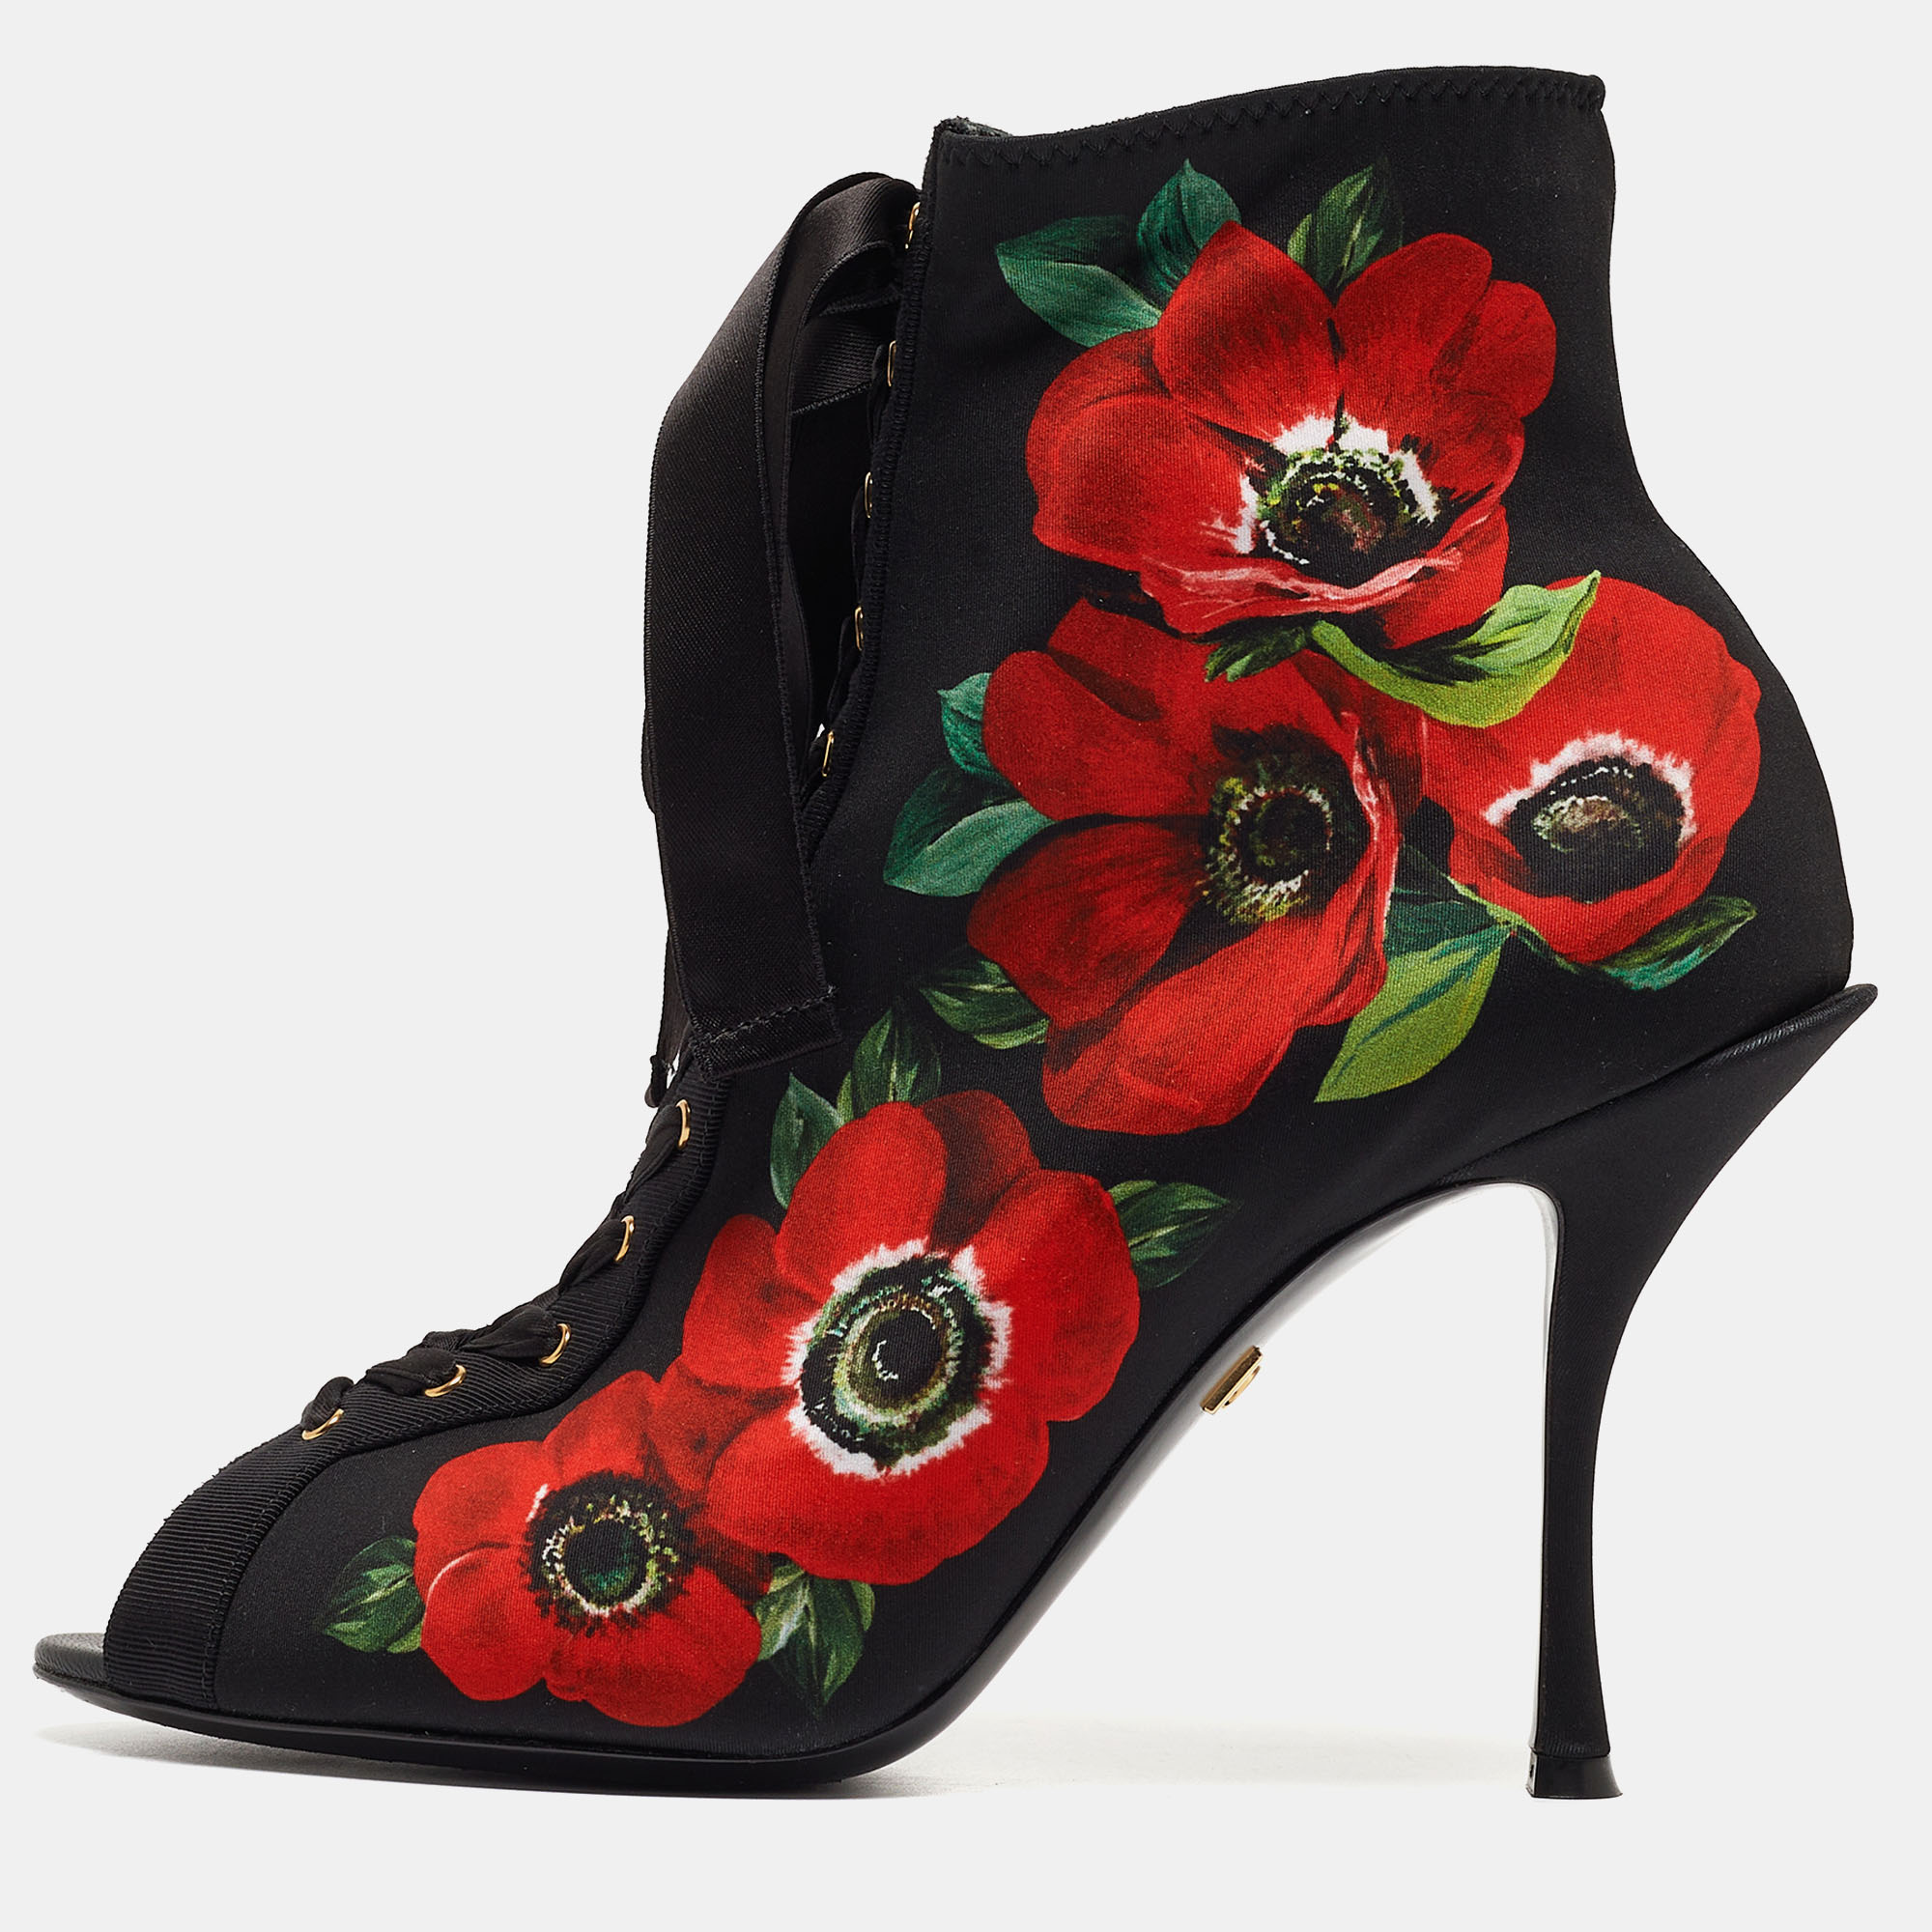 

Dolce & Gabbana Black/Red Floral Print Stretch Fabric Peep Toe Ankle Booties Size